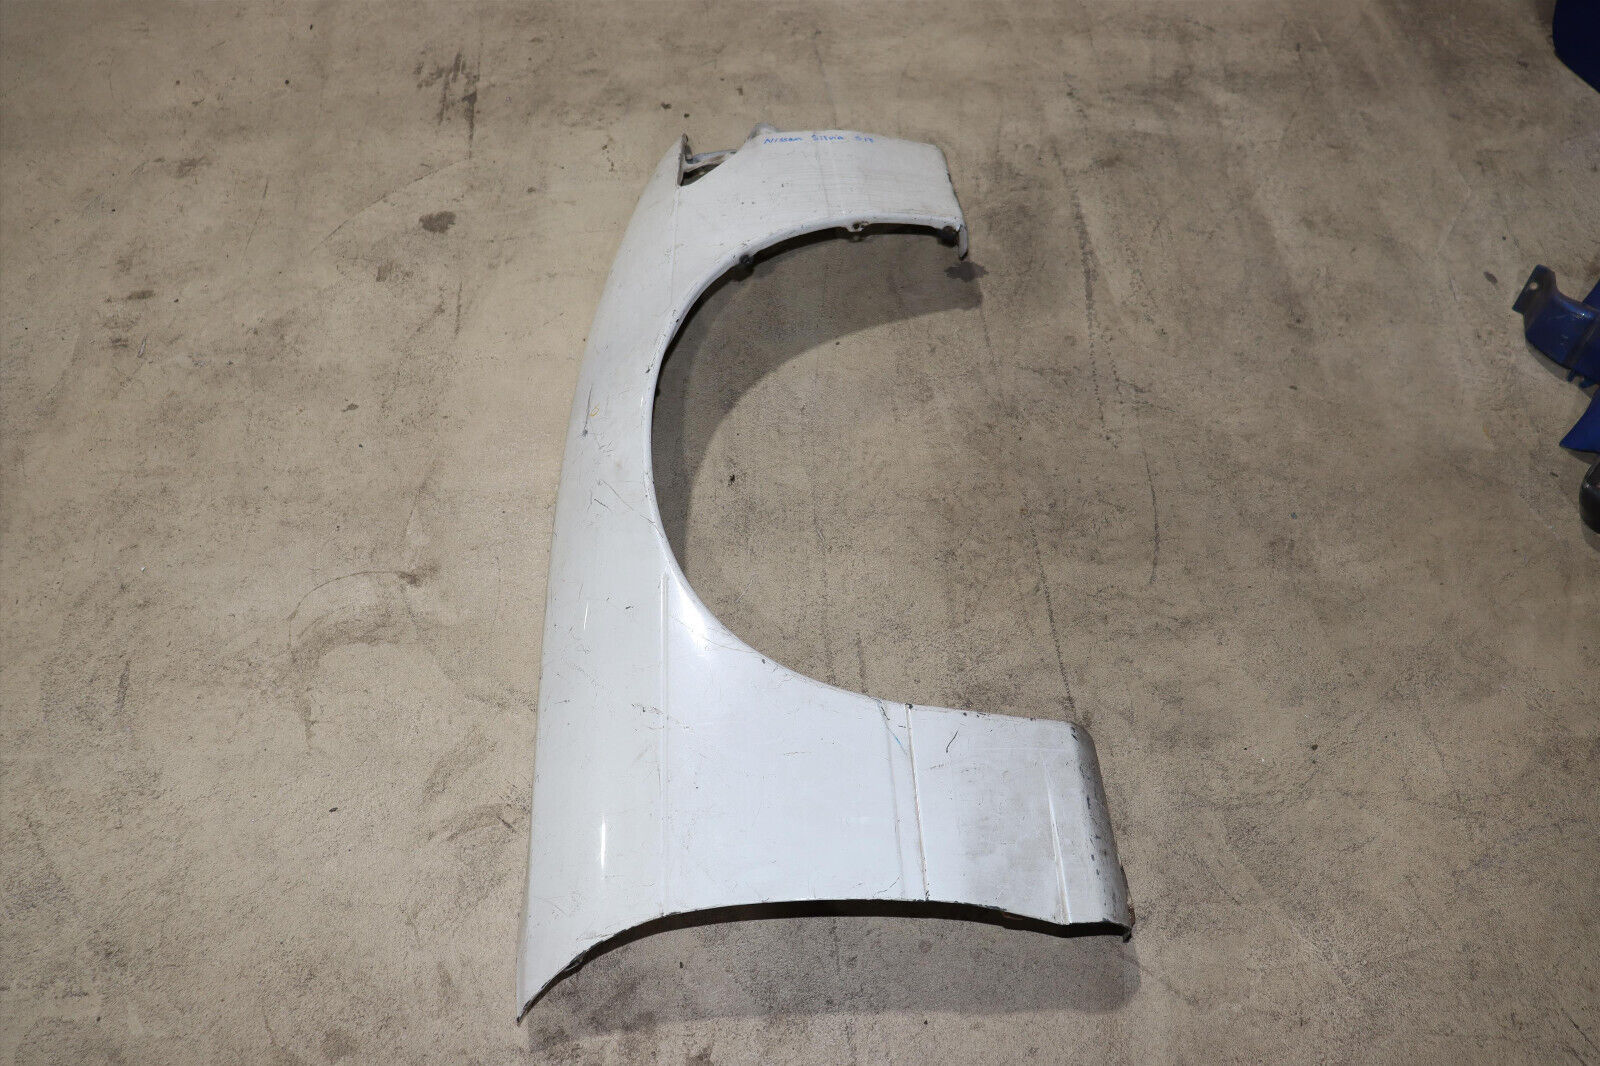 JDM Nissan Silvia S13 Genuine OEM 240SX Front Fender Right Hand Side (Used)